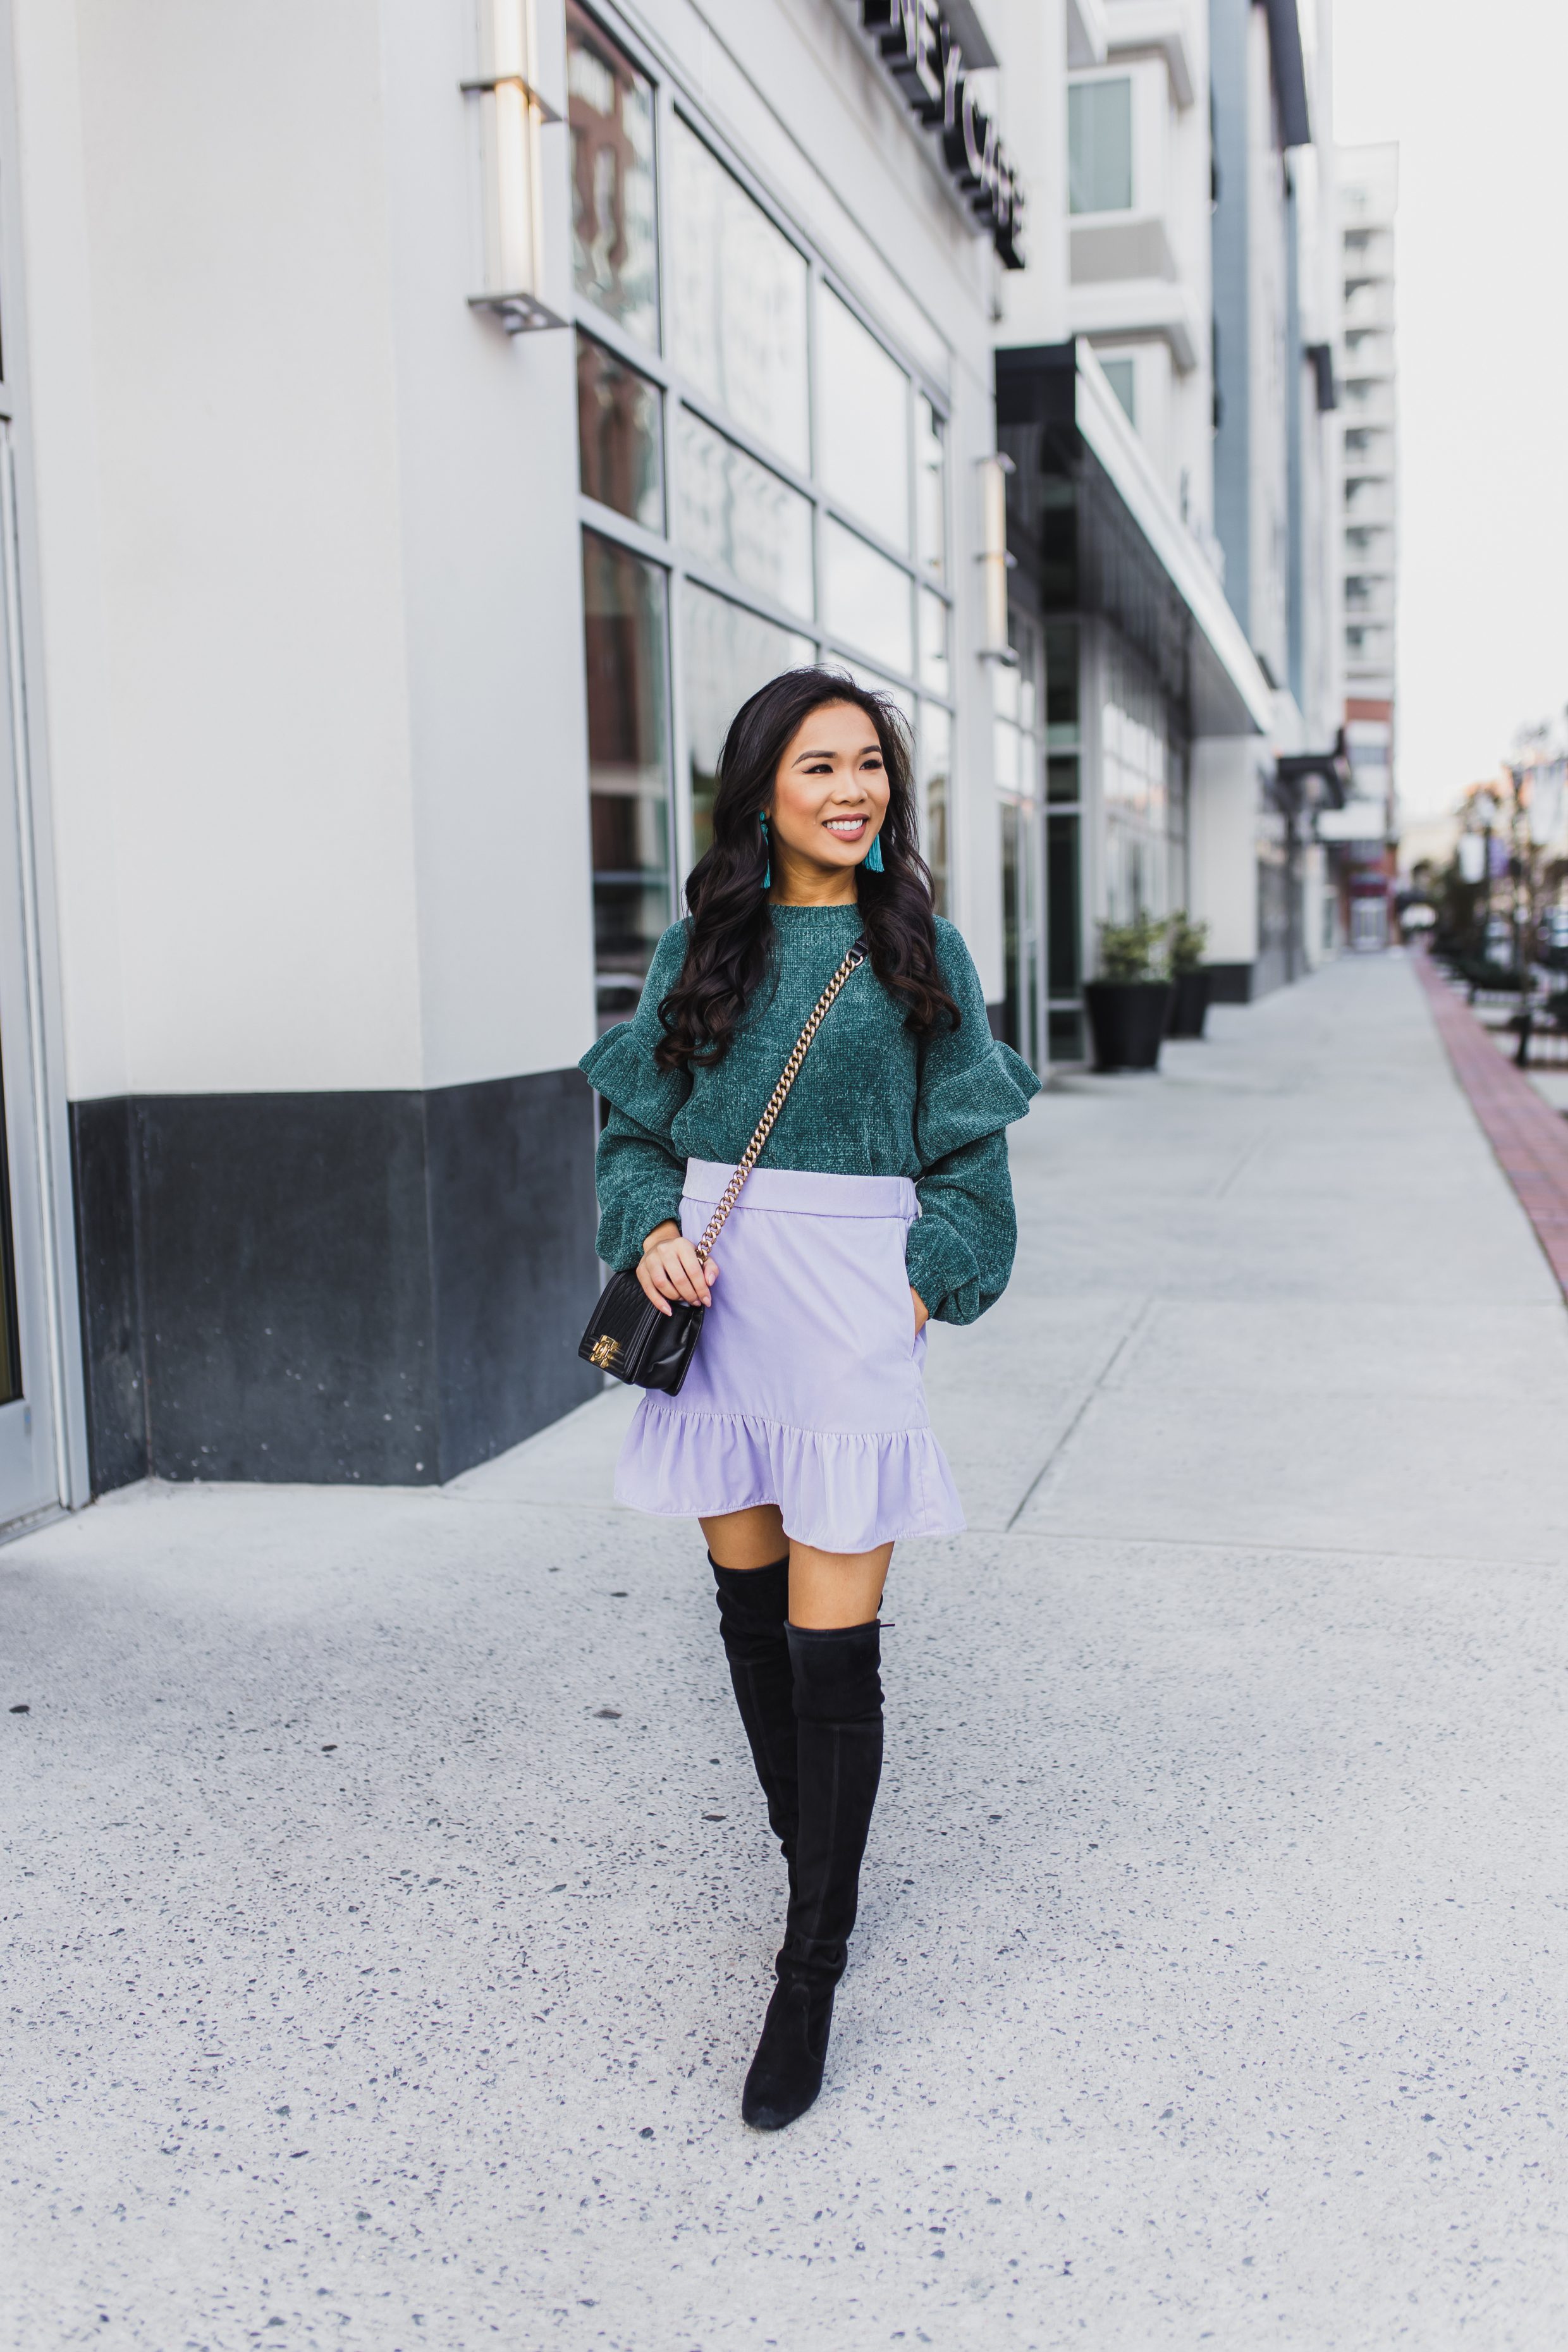 Chenille sweater with ruffle detail paired with velvet skirt and over the knee boots